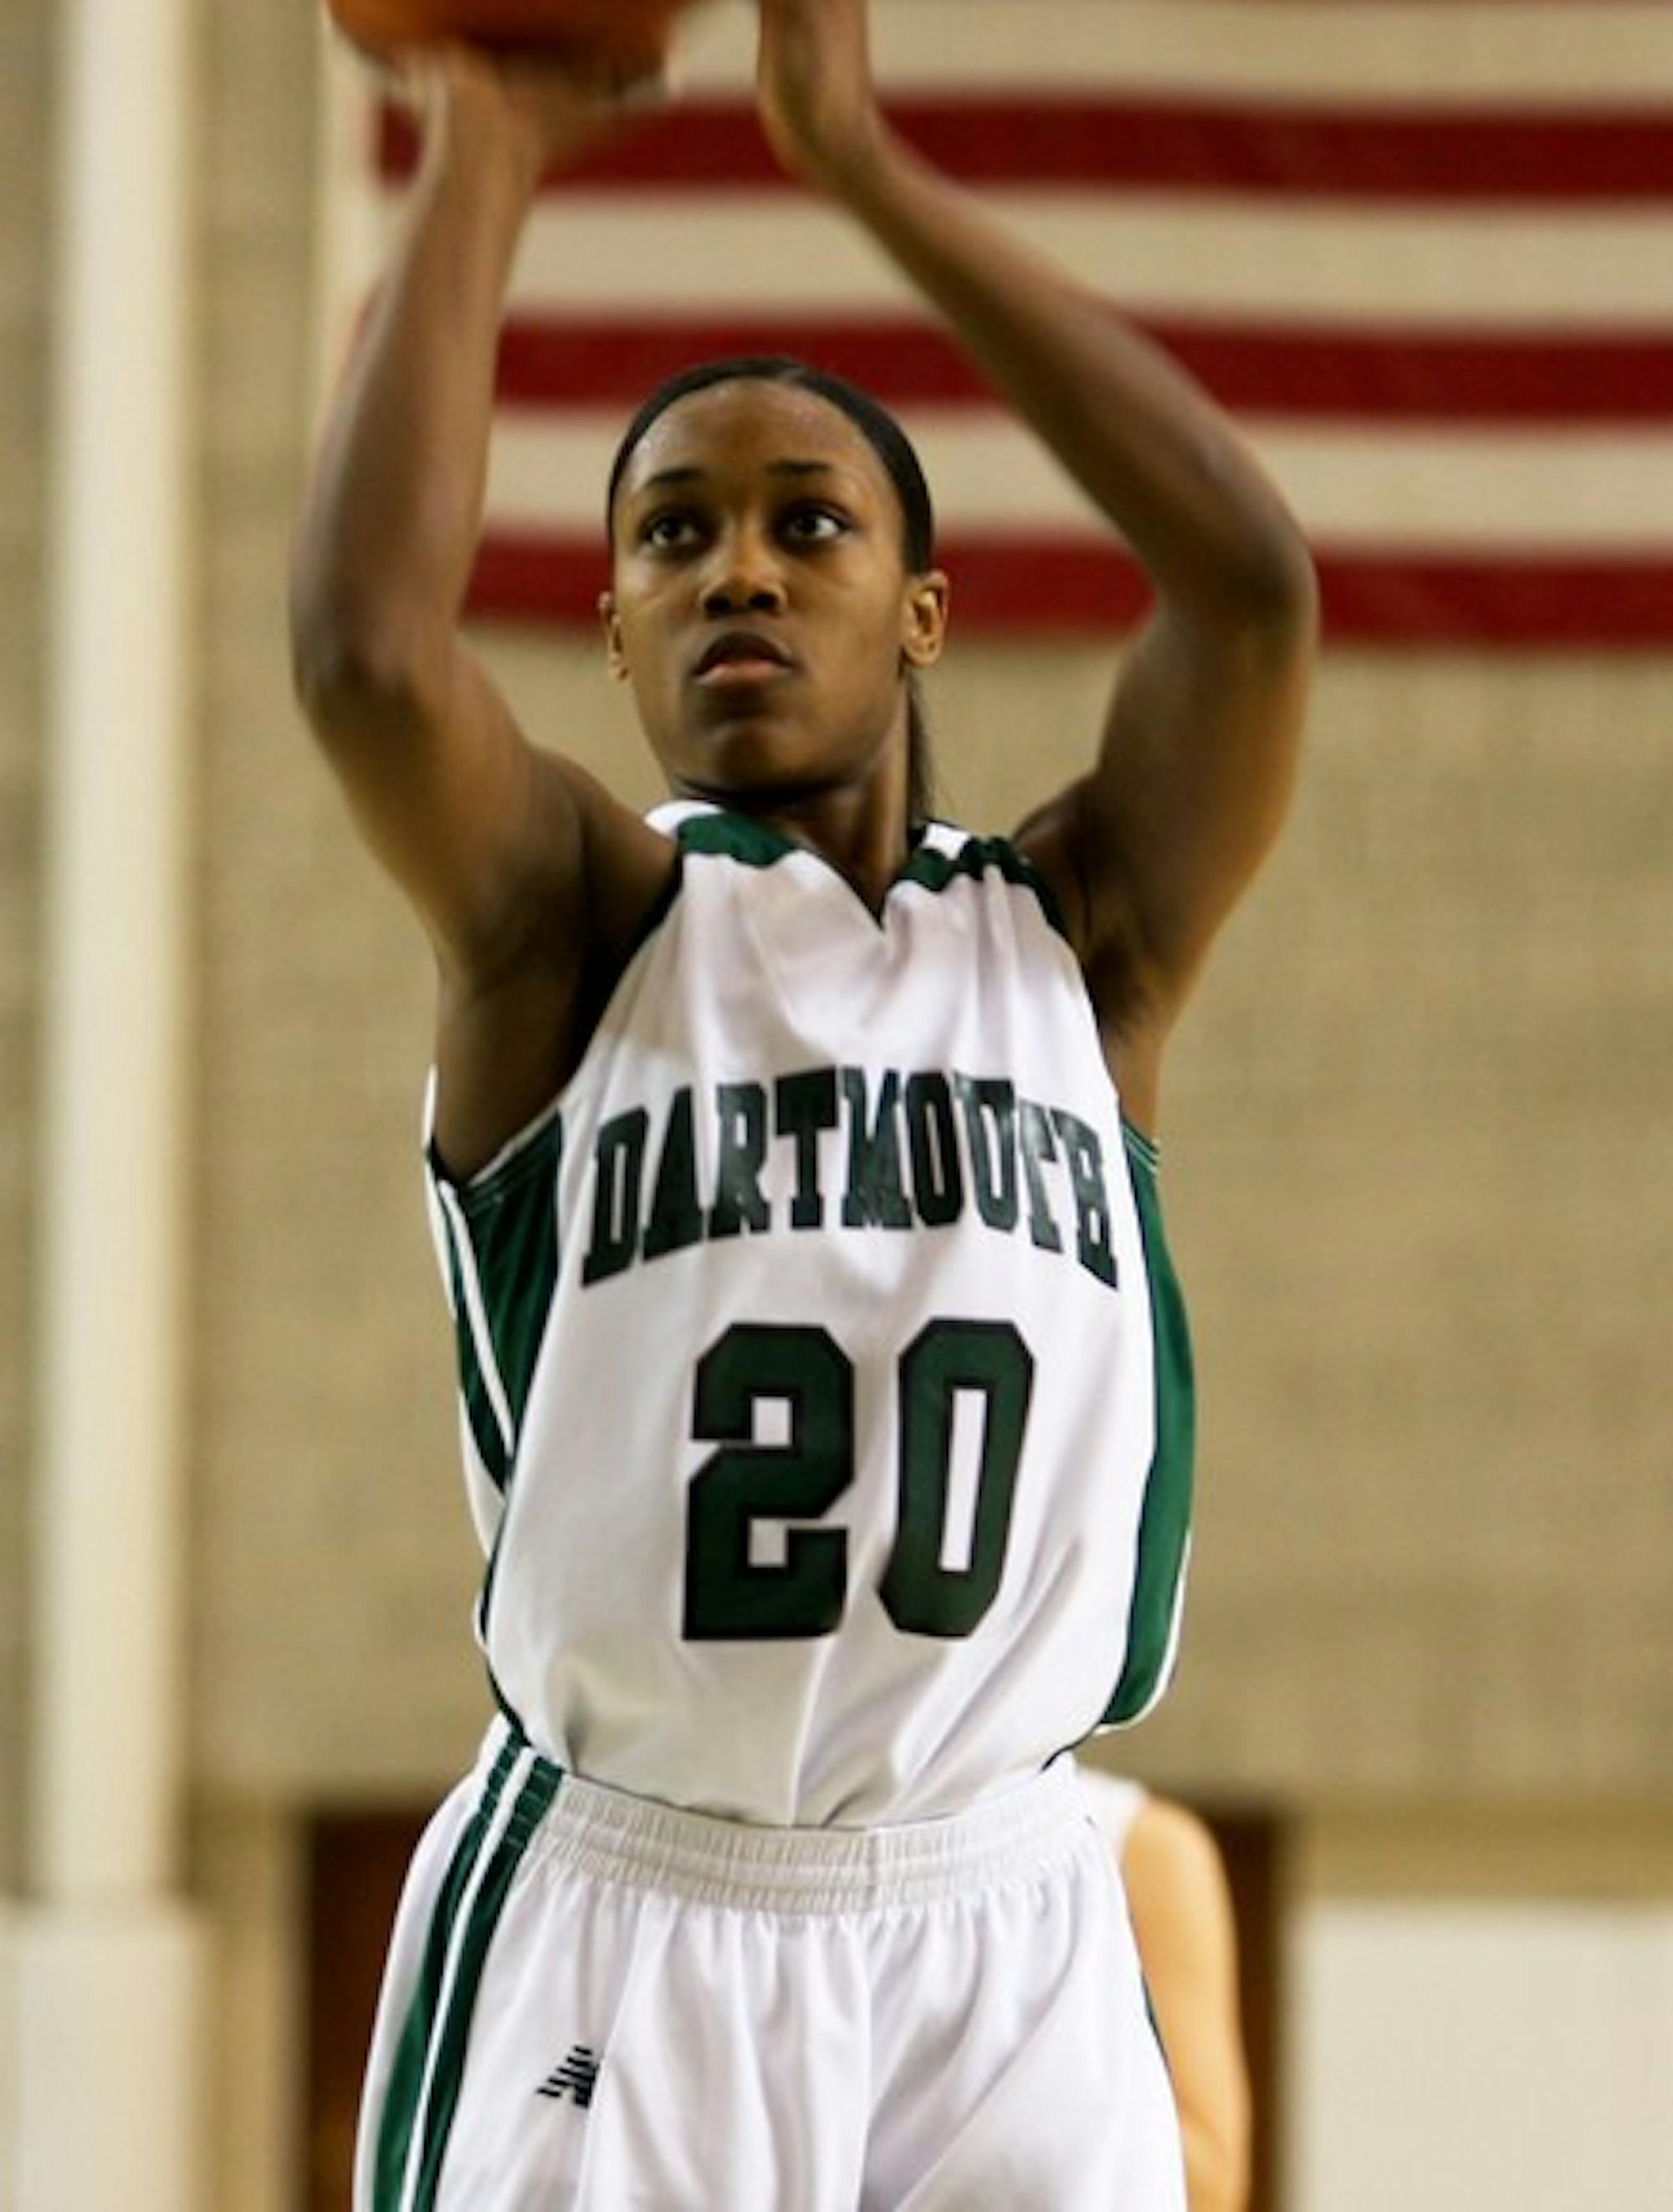 Brittney Smith '11 was a bright spot for the Big Green, scoring 11 points on five of 11 from the field. She also led the team with nine rebounds on the night.